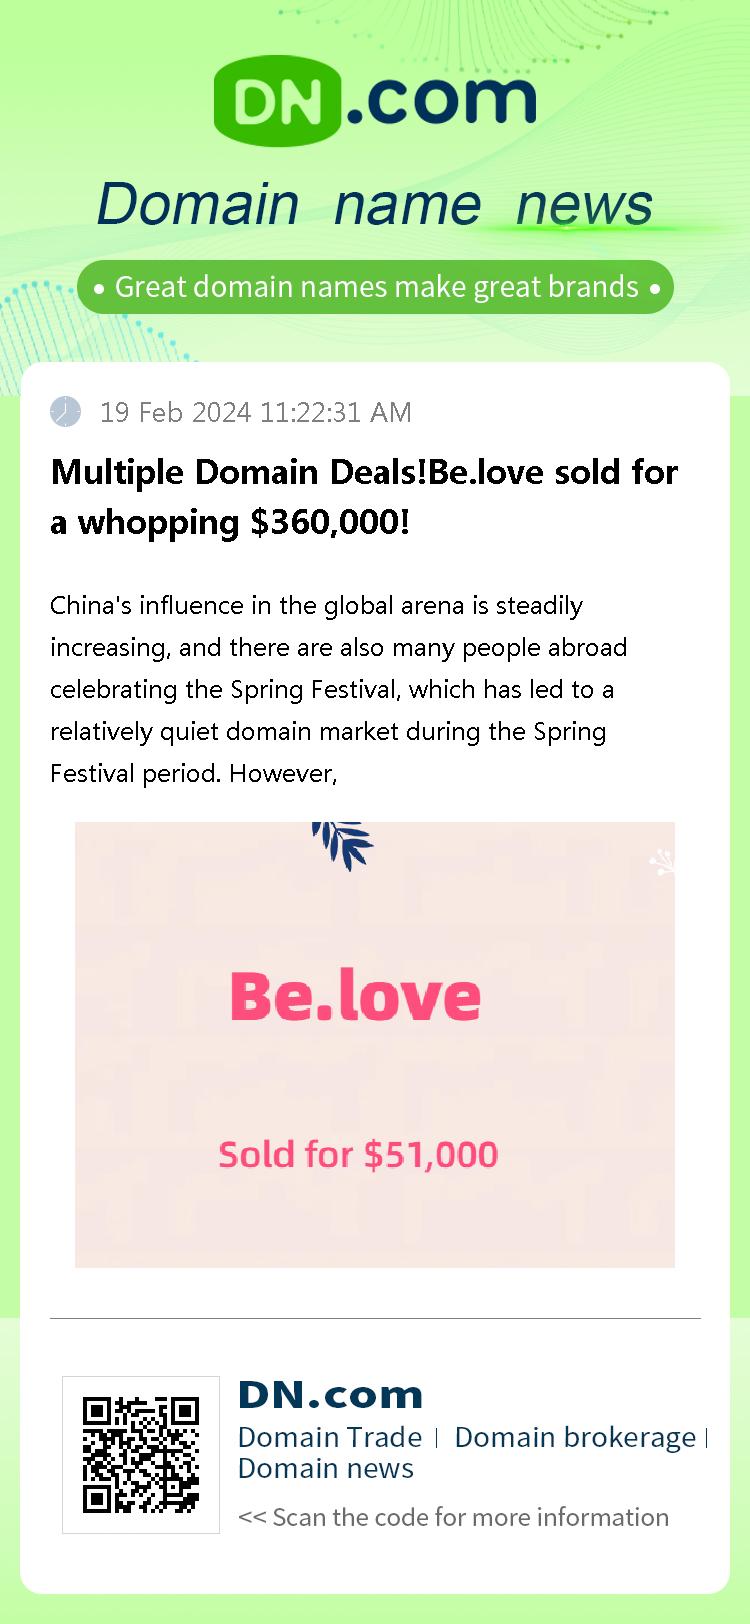 Multiple Domain Deals!Be.love sold for a whopping $360,000!